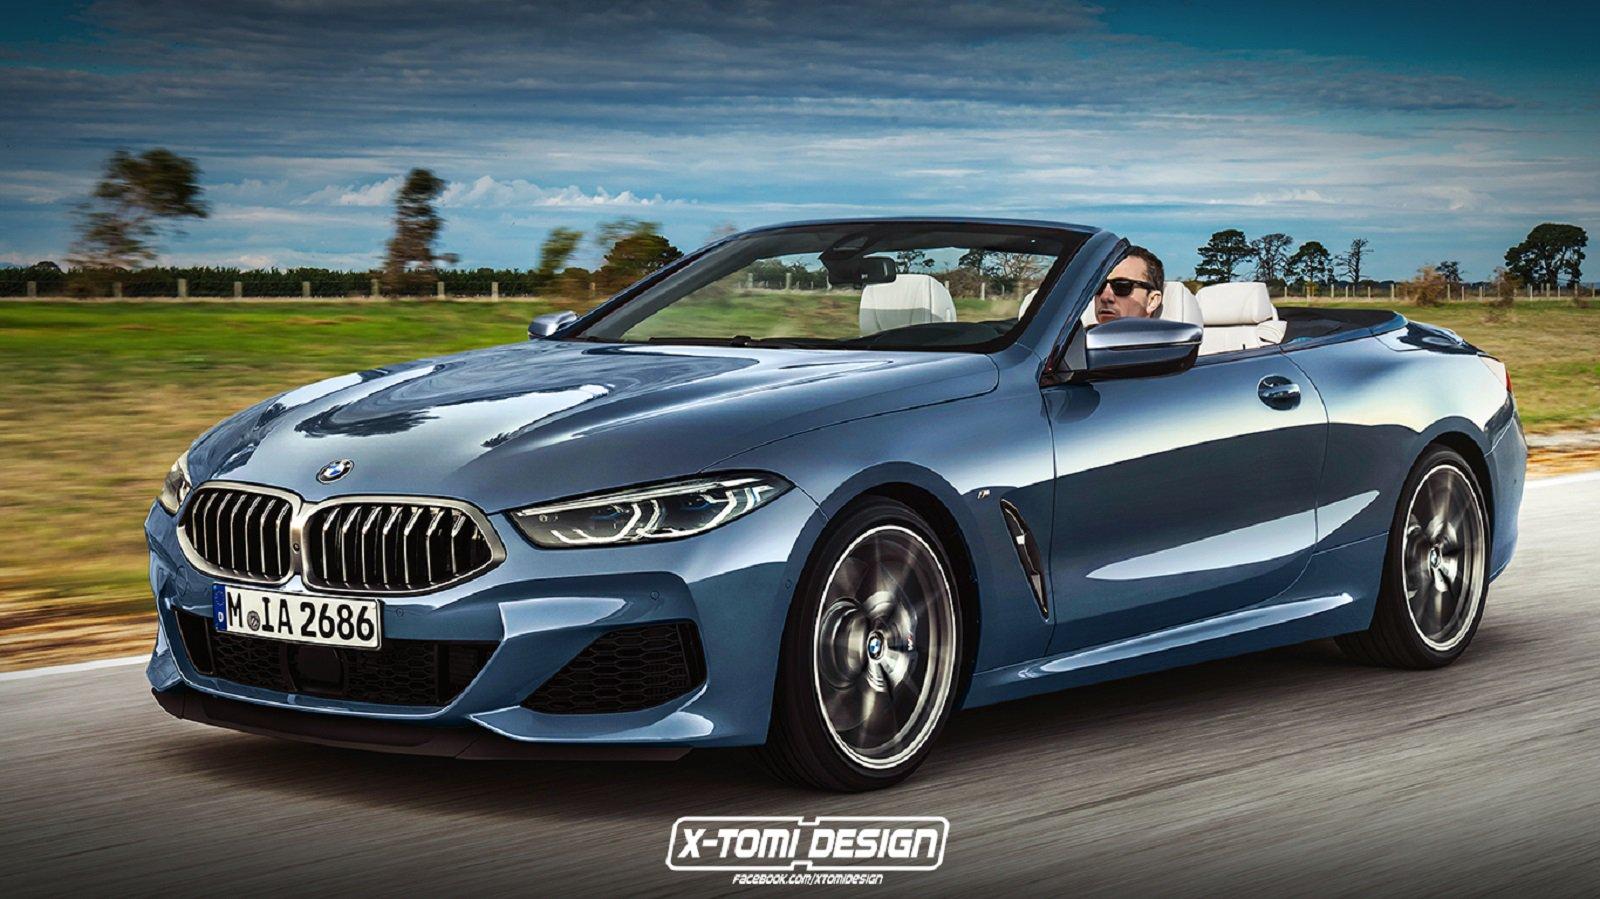 Here's The 2019 BMW 8 Series Convertible Before You're Supposed To